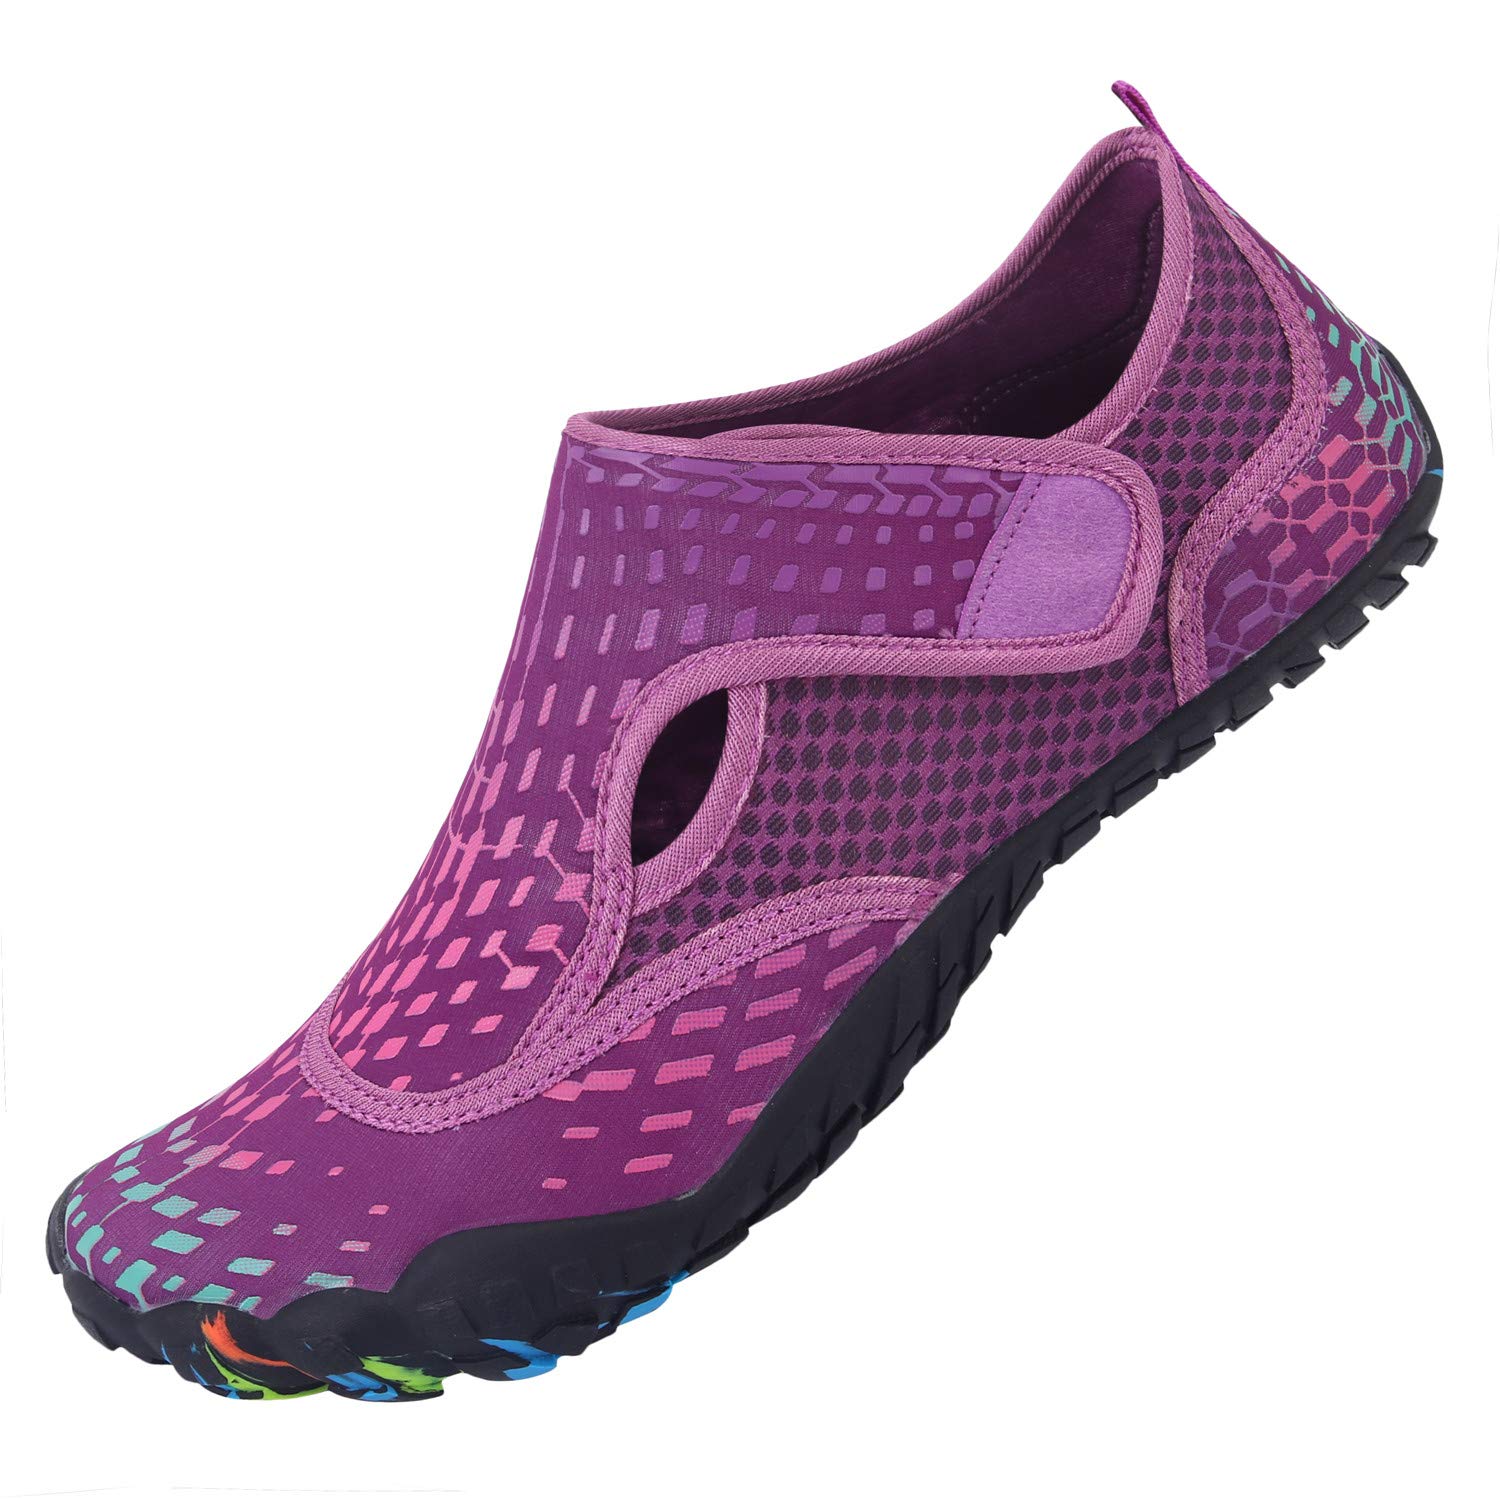 L-RUN Womens Water Sports Shoes for Surfing